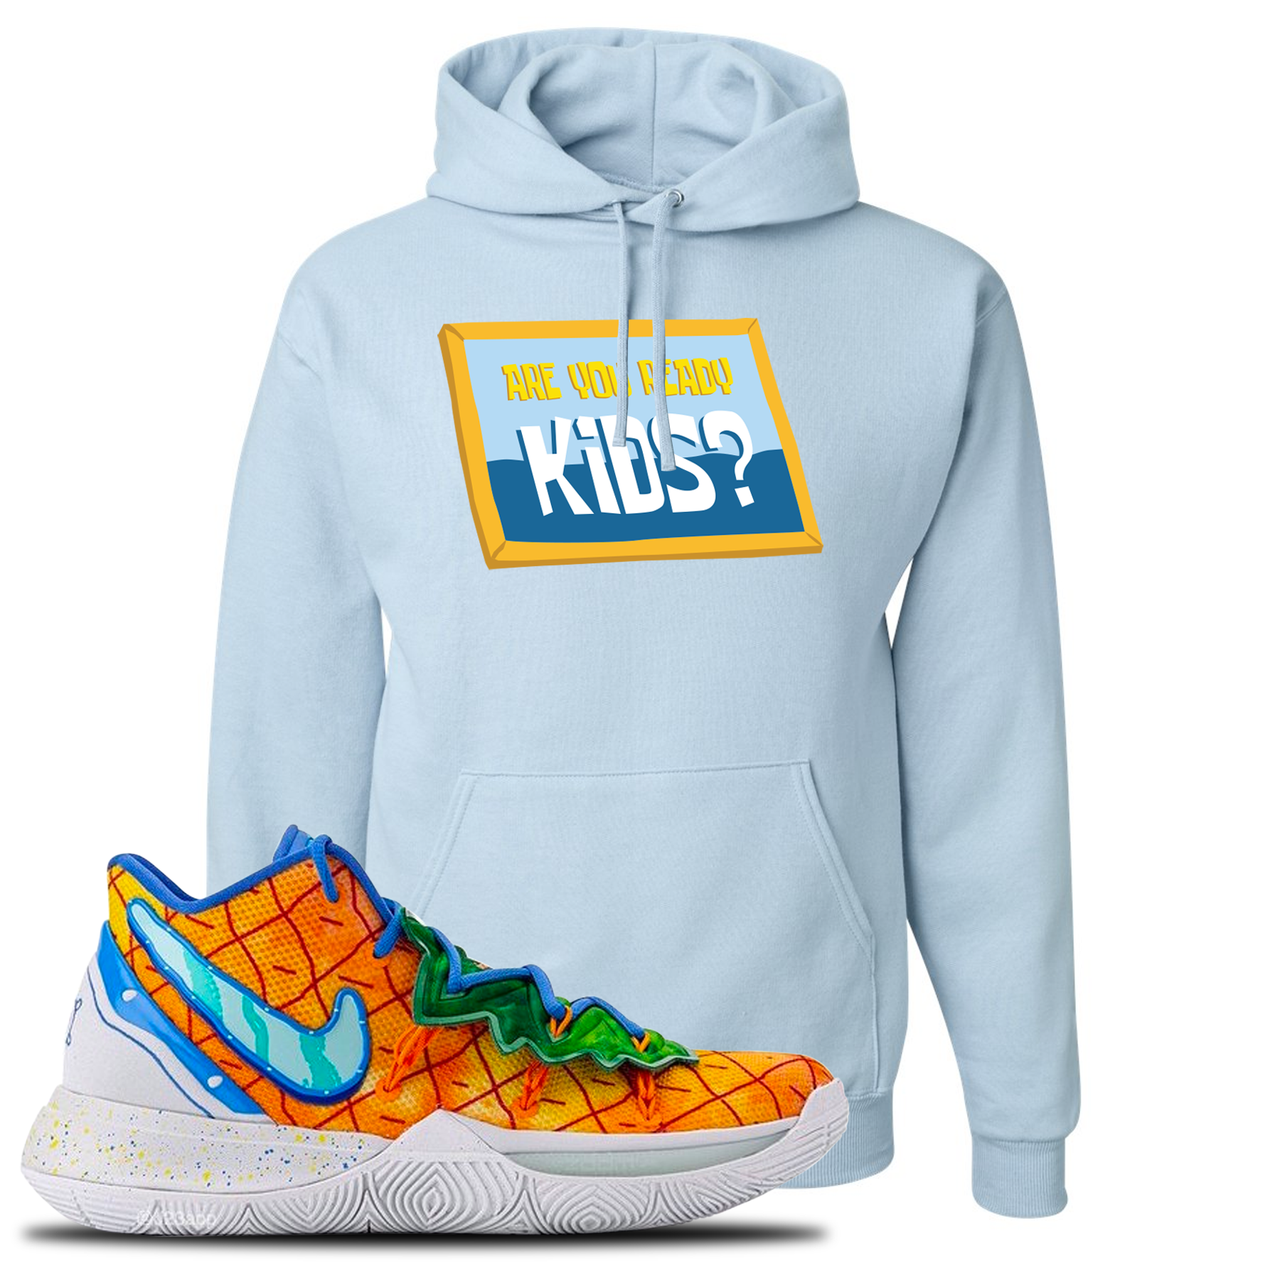 Kyrie 5 Pineapple House Are You Ready Kids? Light Blue Sneaker Hook Up Pullover Hoodie